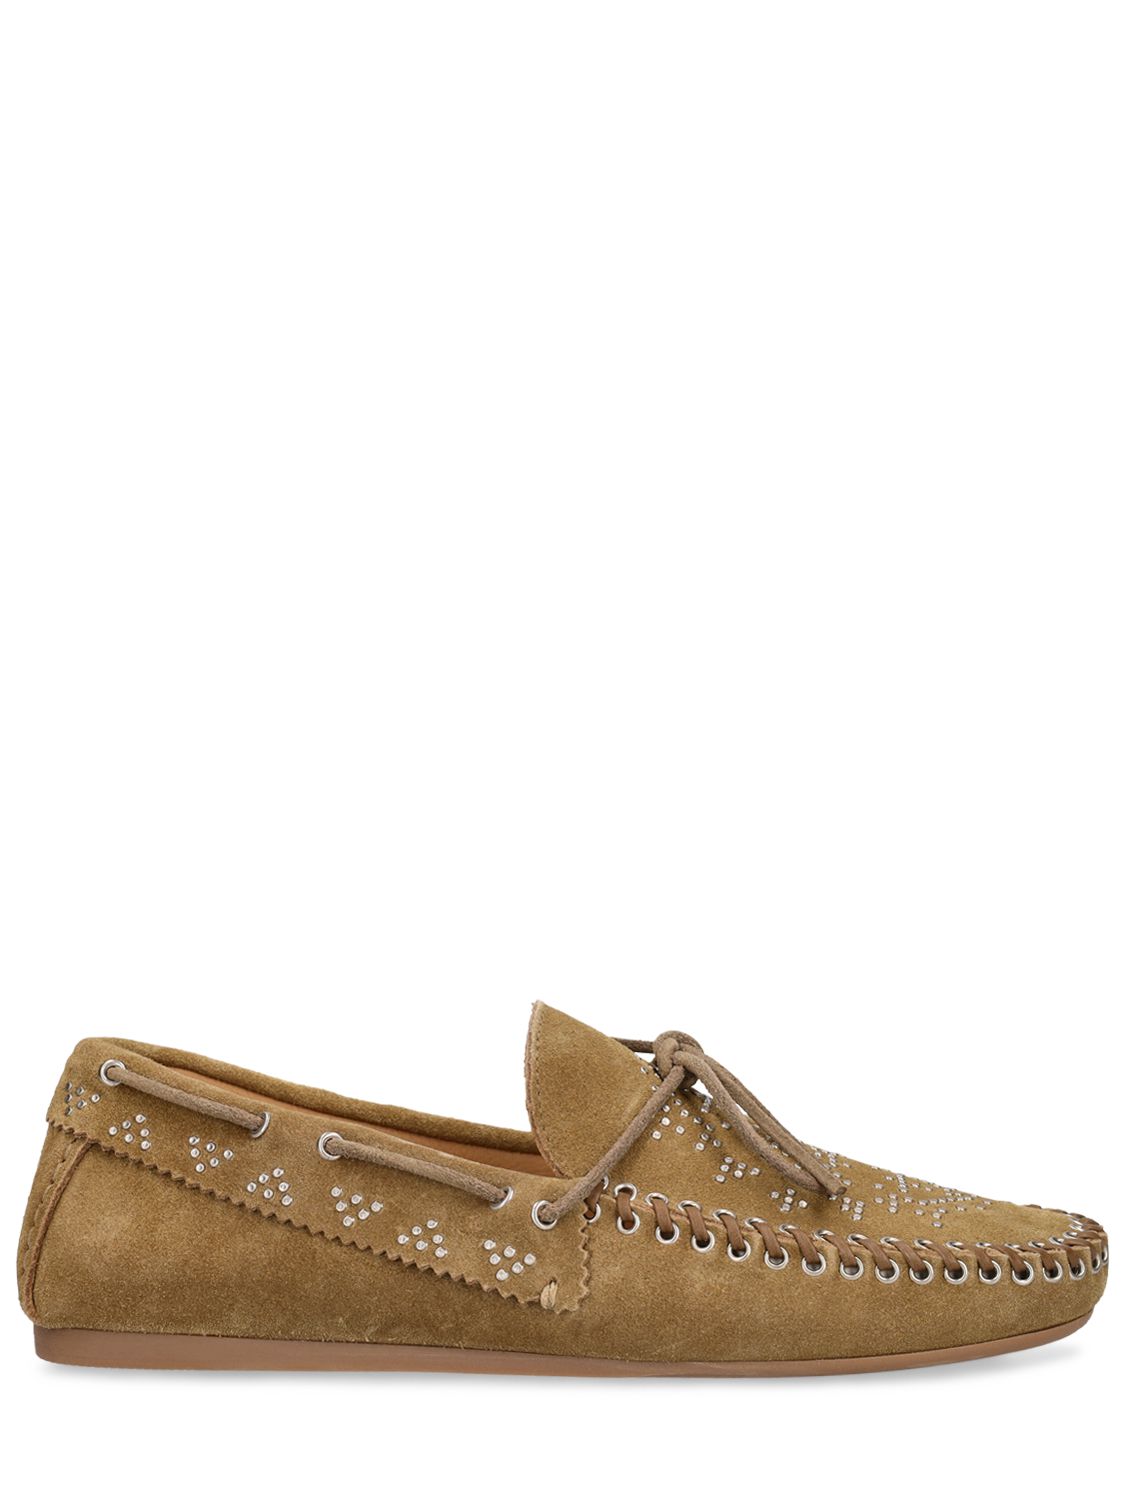 10mm Freen-gb Studded Suede Loafers